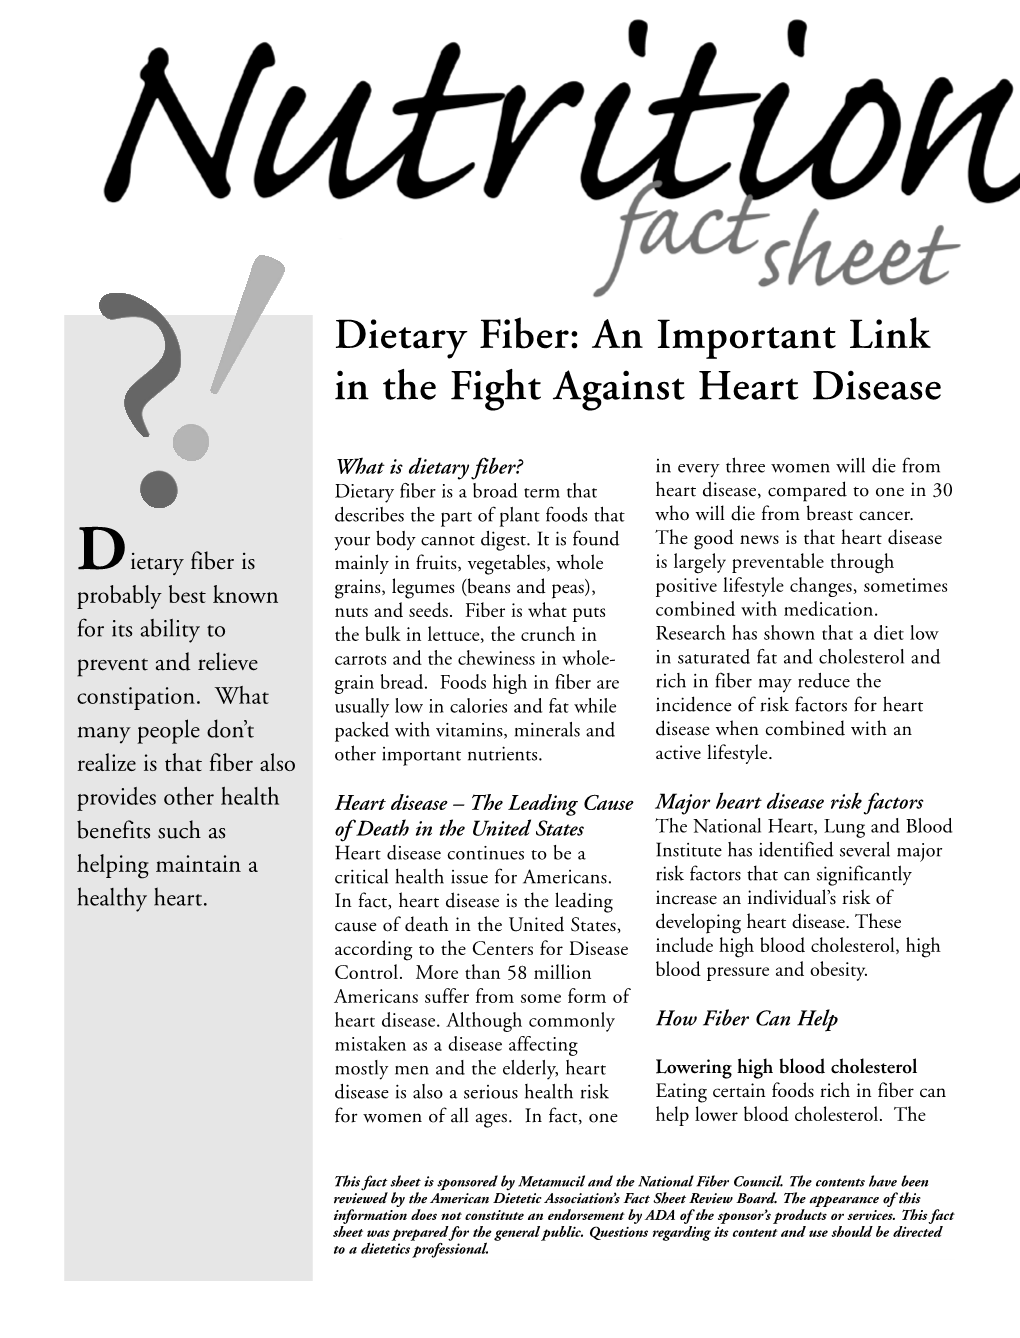 Dietary Fiber: an Important Link in the Fight Against Heart Disease